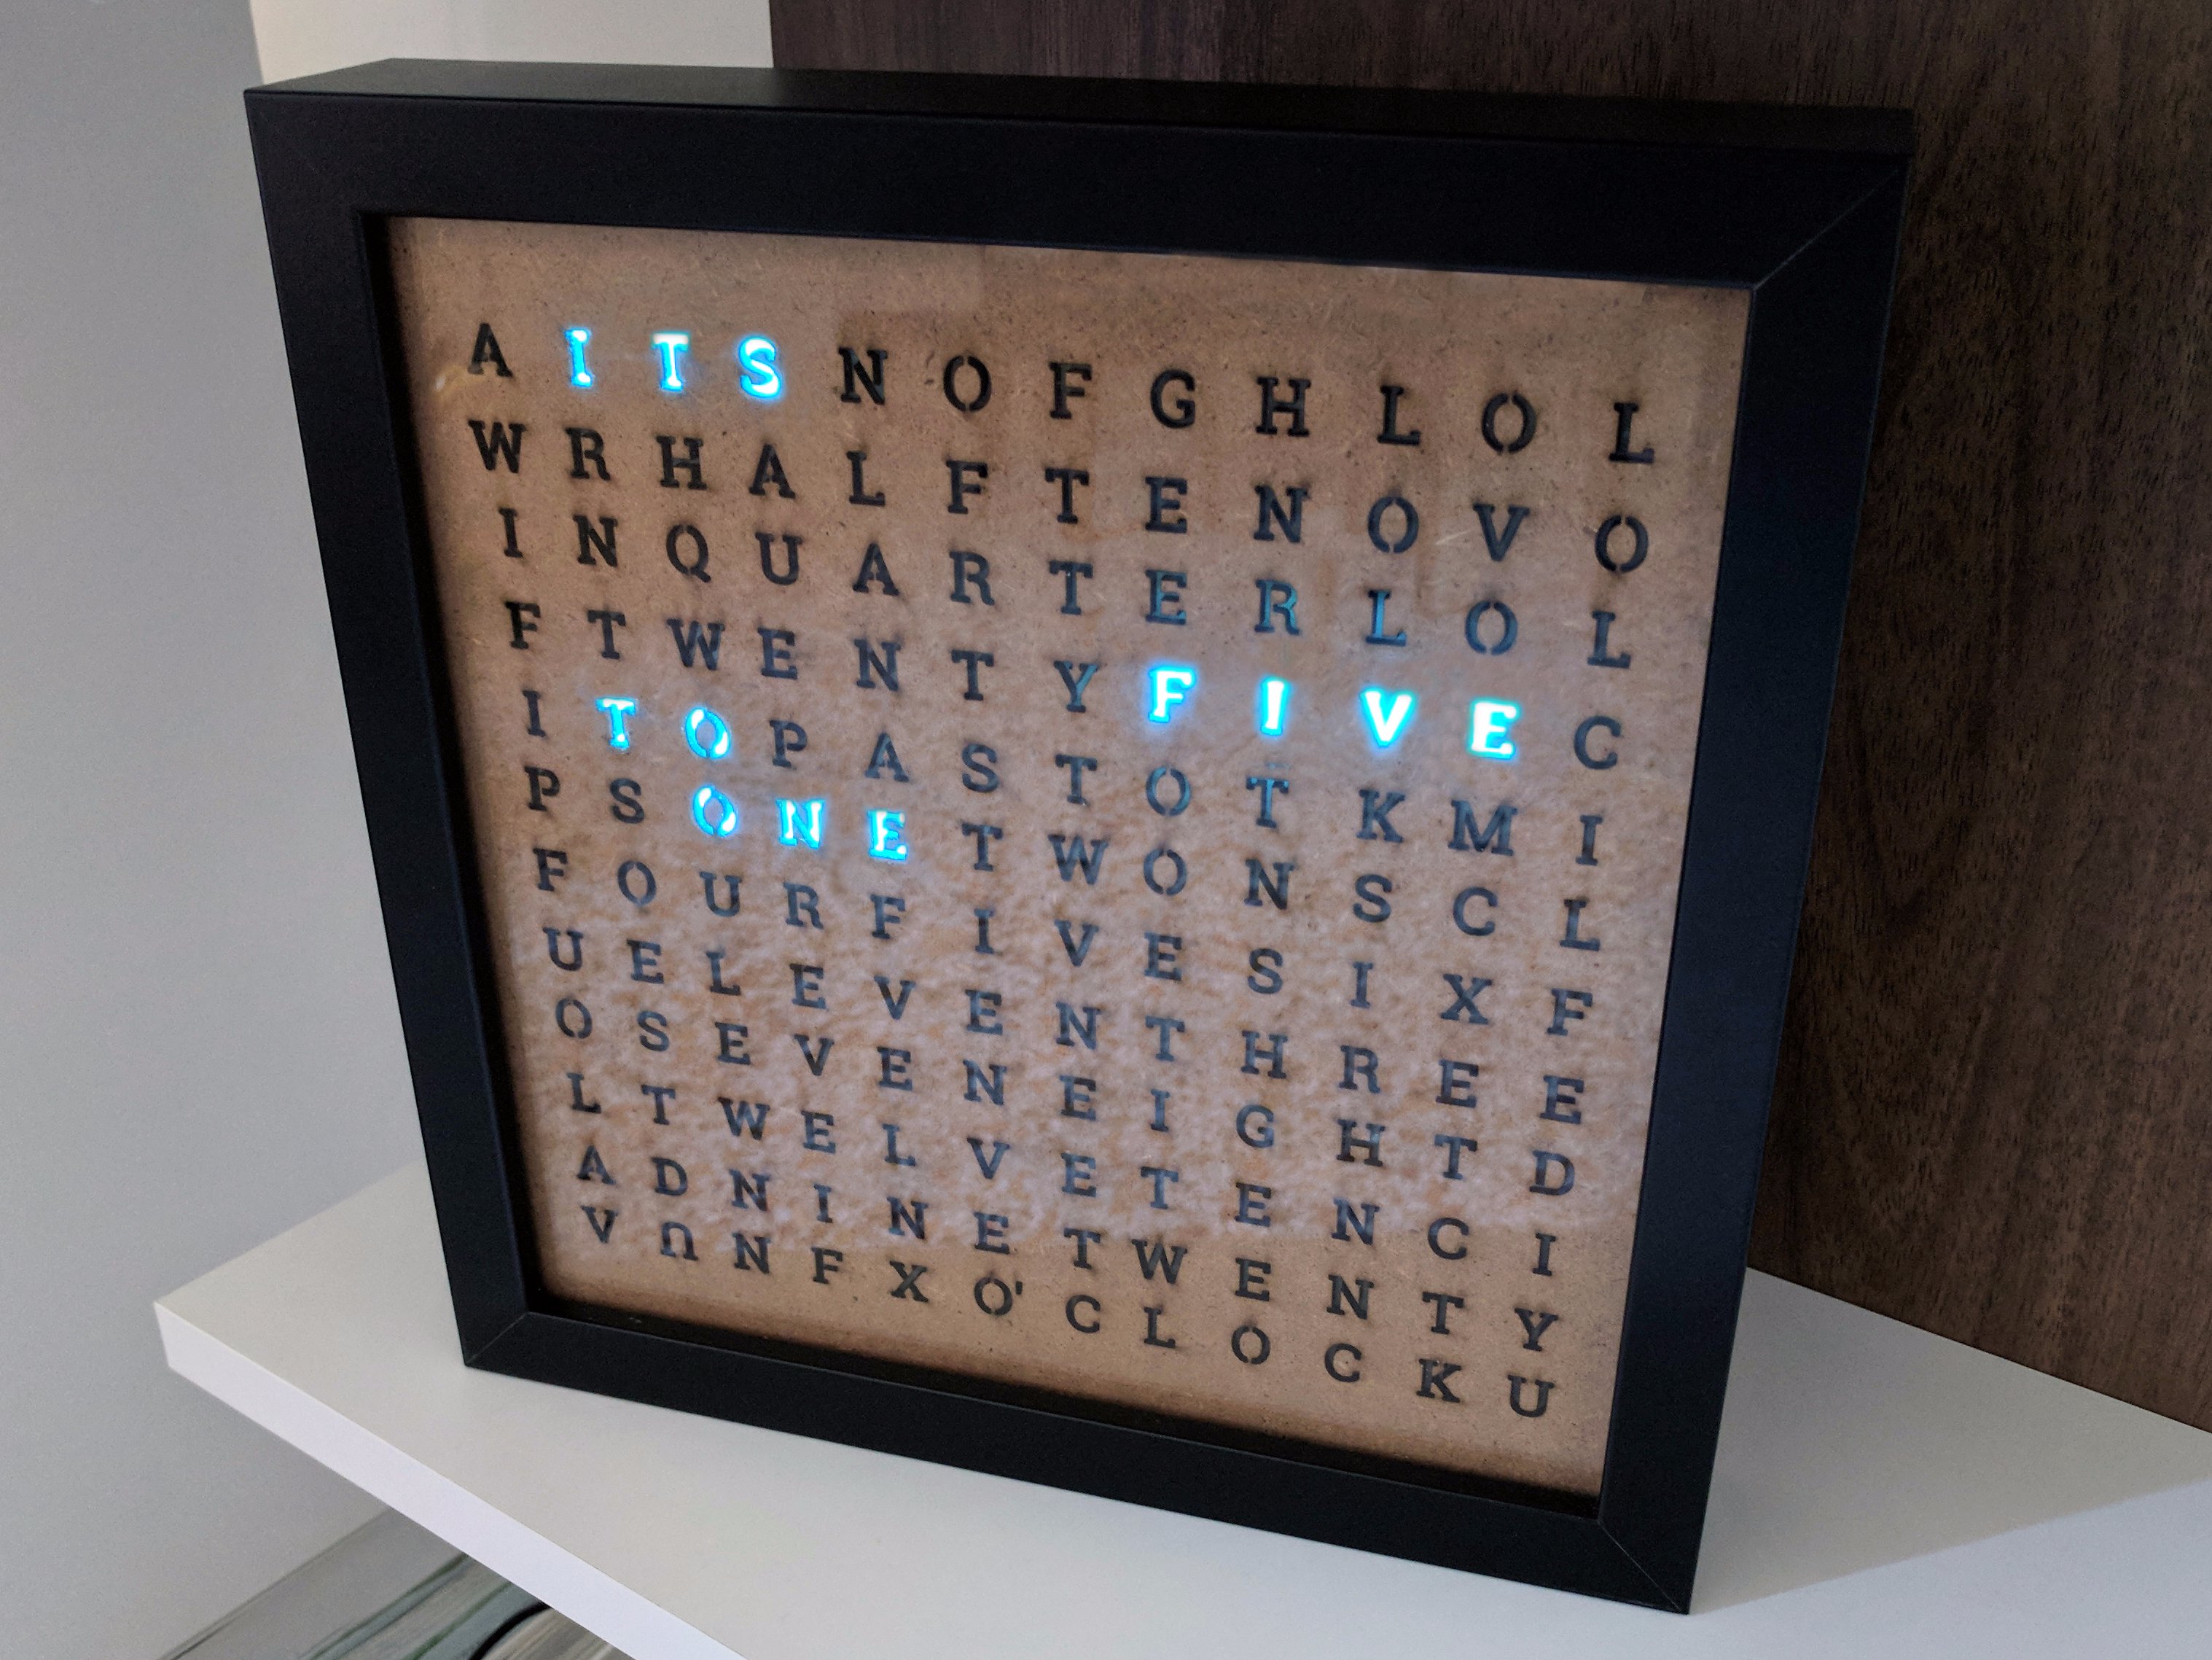 word clock app android